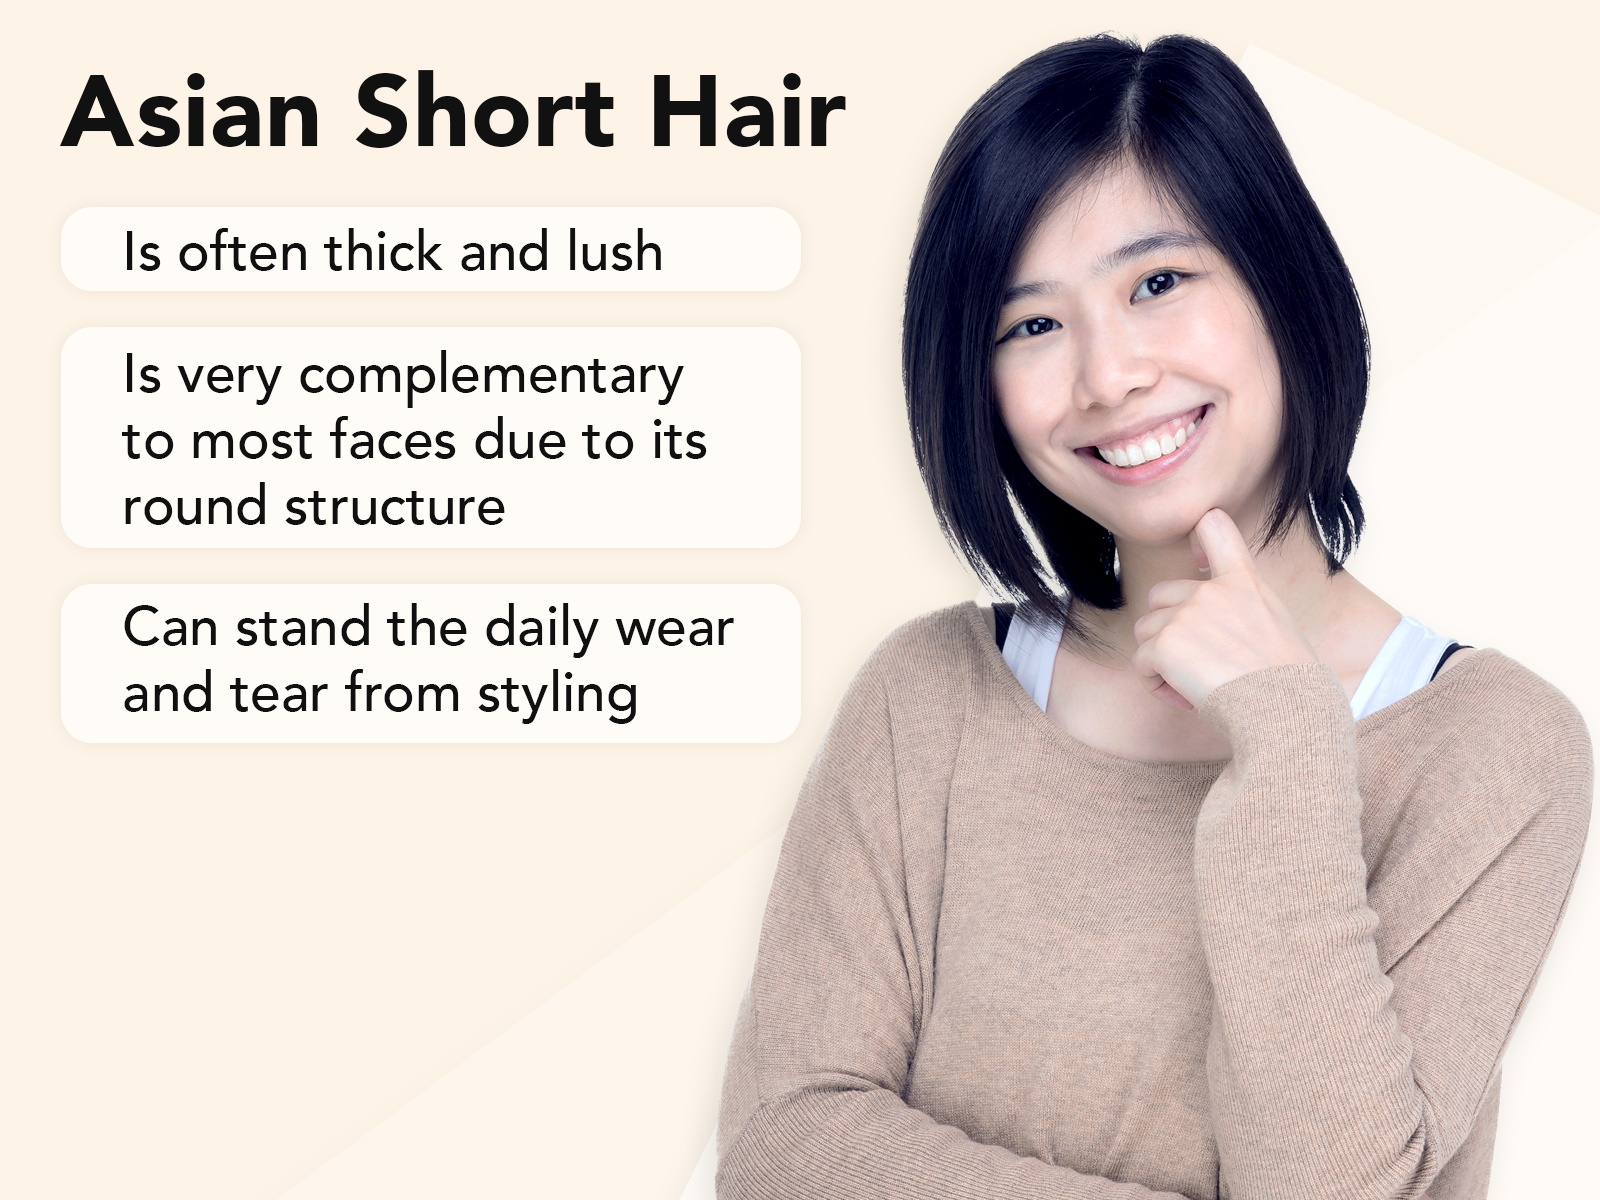 Asian Short Hair explainer image on a tan background